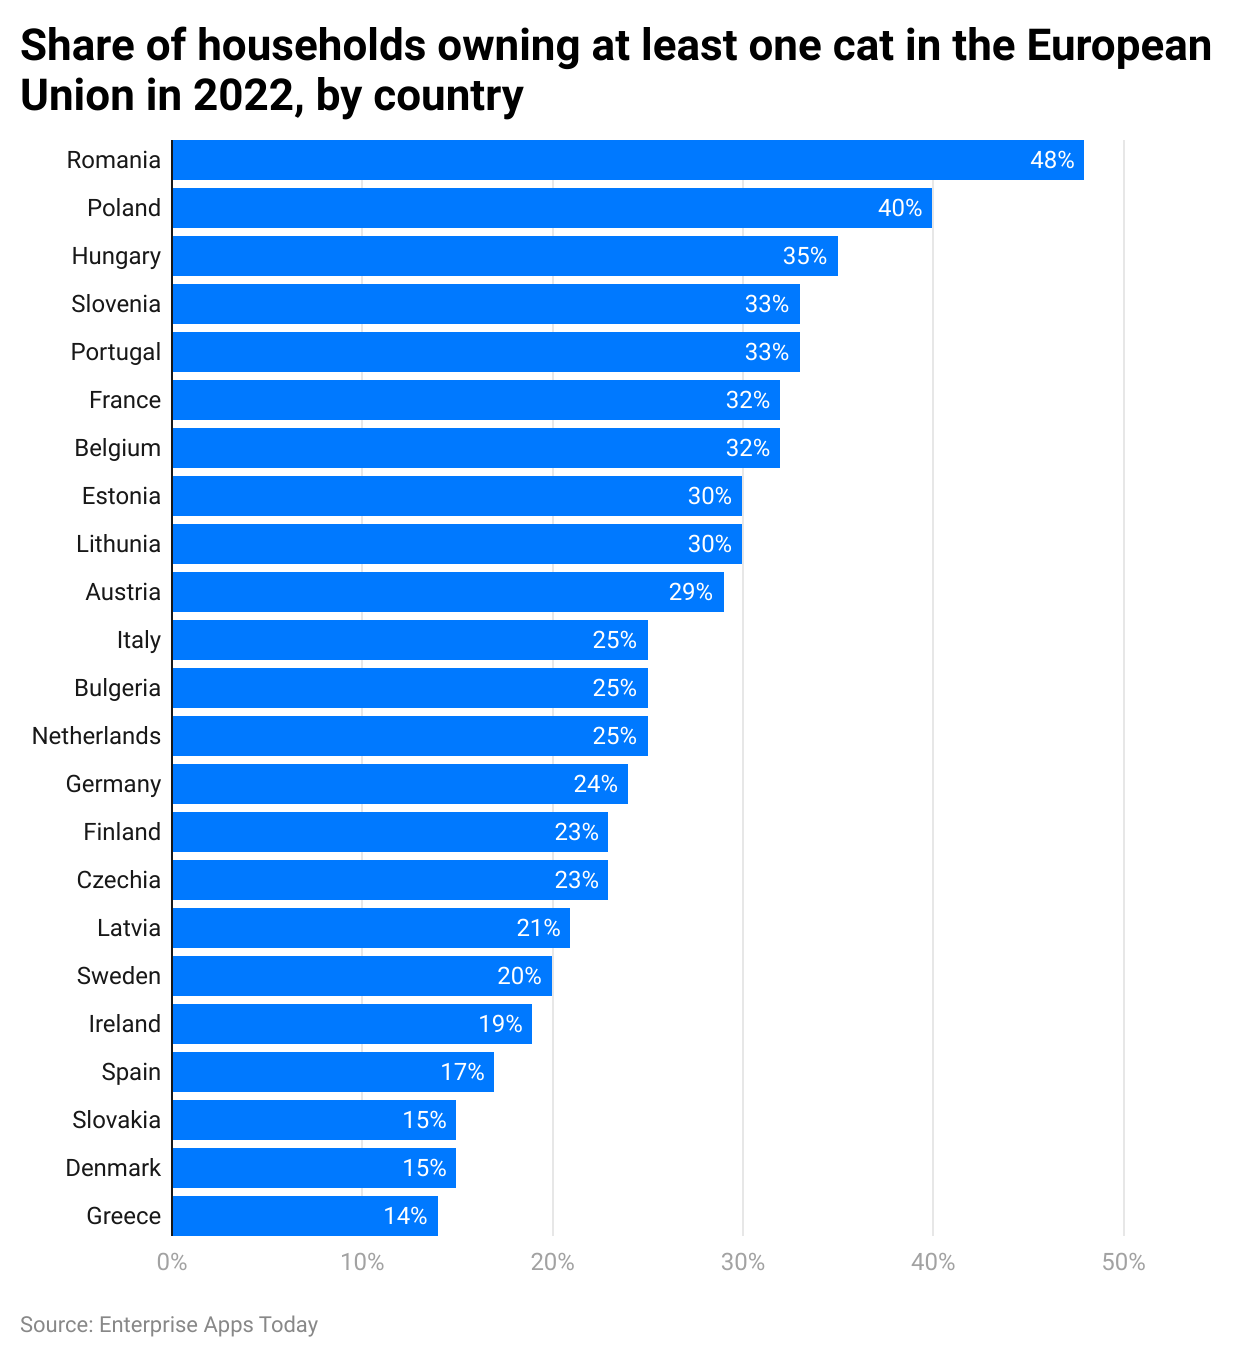 share-of-households-owning-at-least-one-cat-in-the-european-union-in-2022-by-country